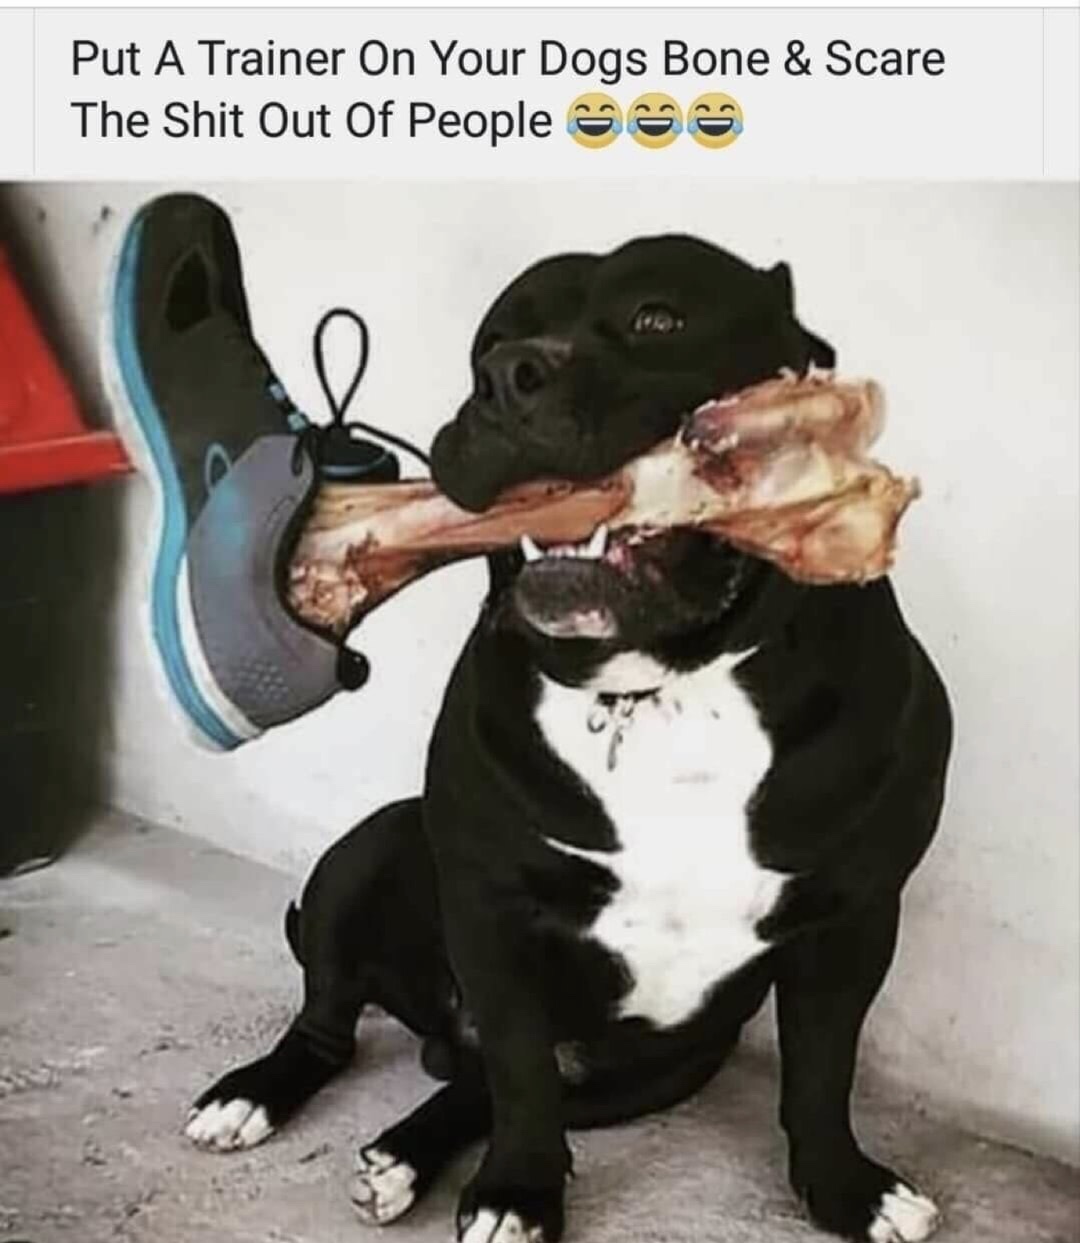 memes - put a trainer on your dog's bone - Put A Trainer On Your Dogs Bone & Scare The Shit Out Of People